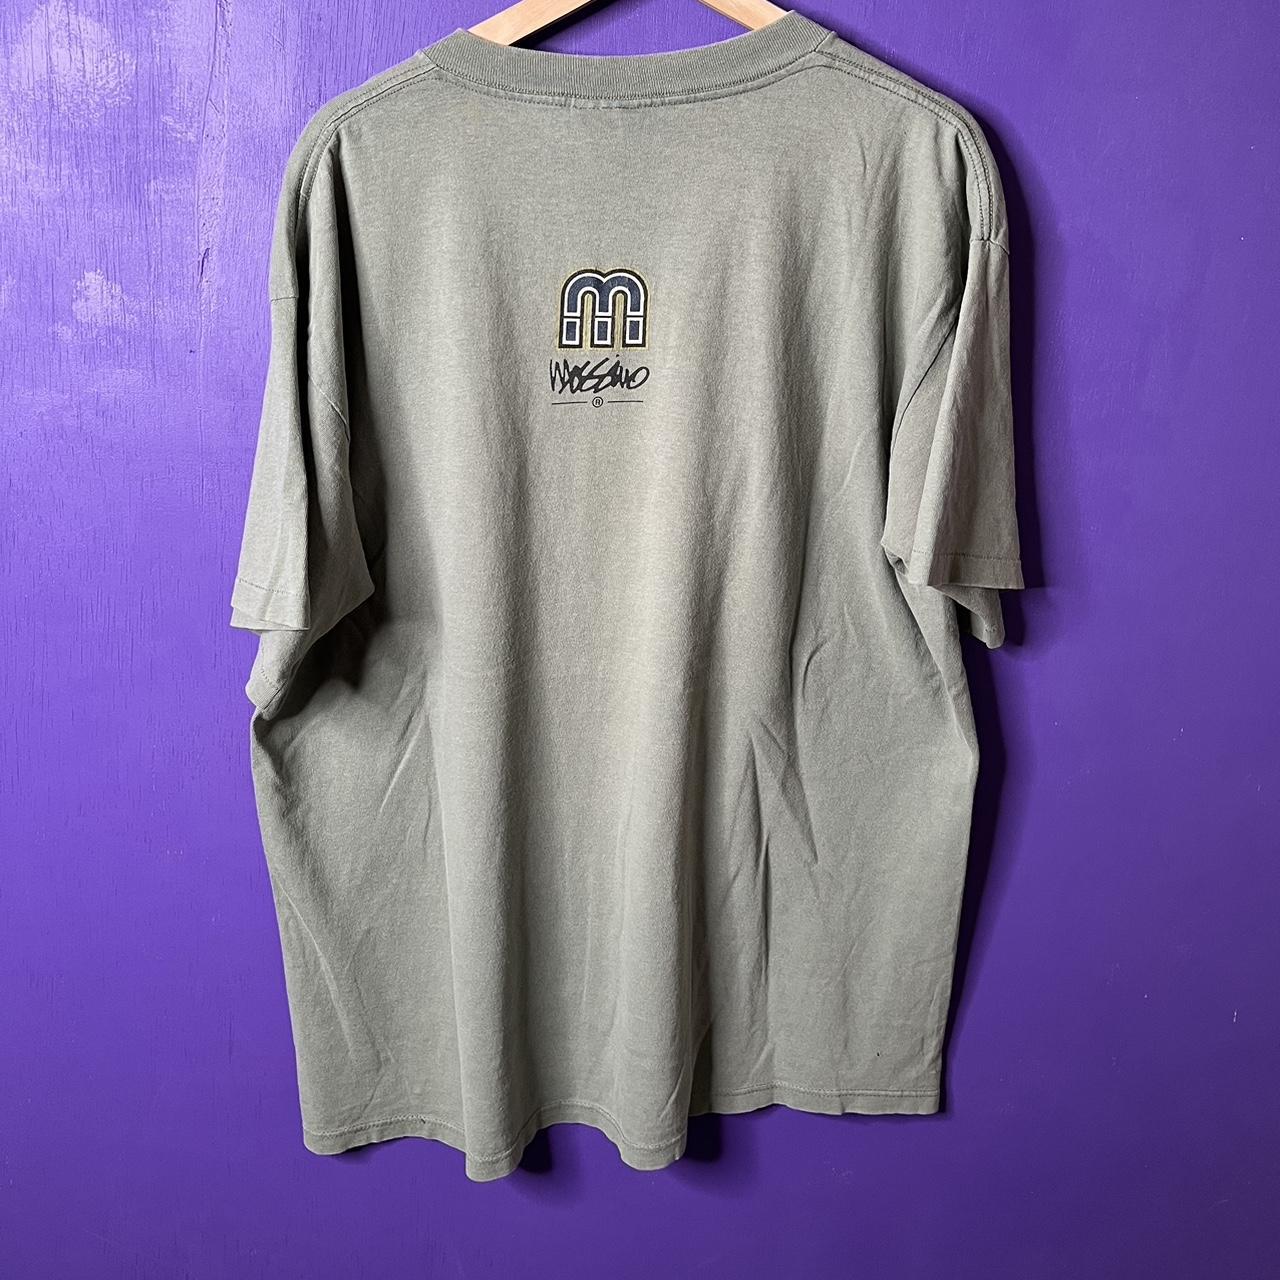 Vintage 90s Mossimo faded spell-out logo t-shirt. Is - Depop